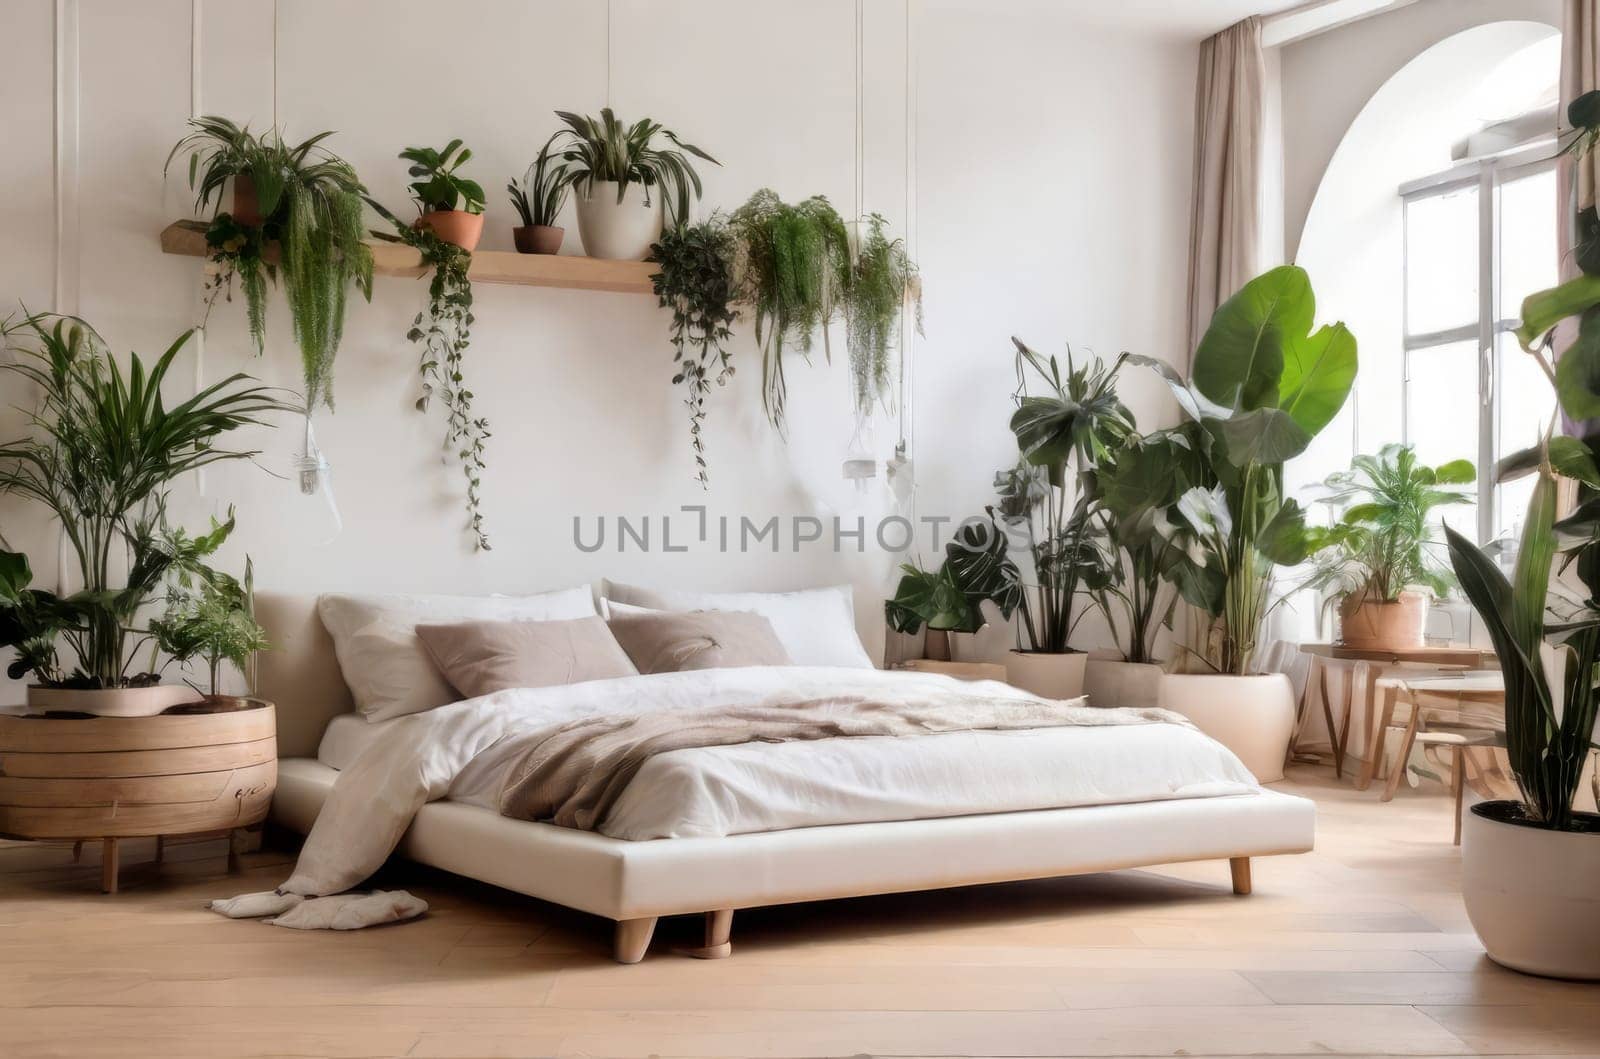 Comfortable ambiance in a home garden, bedroom in white and wooden design. Close-up: bed, stylish parquet, and a wealth of indoor plants. Interior with urban jungle elements. Biophilia concept. by Annu1tochka